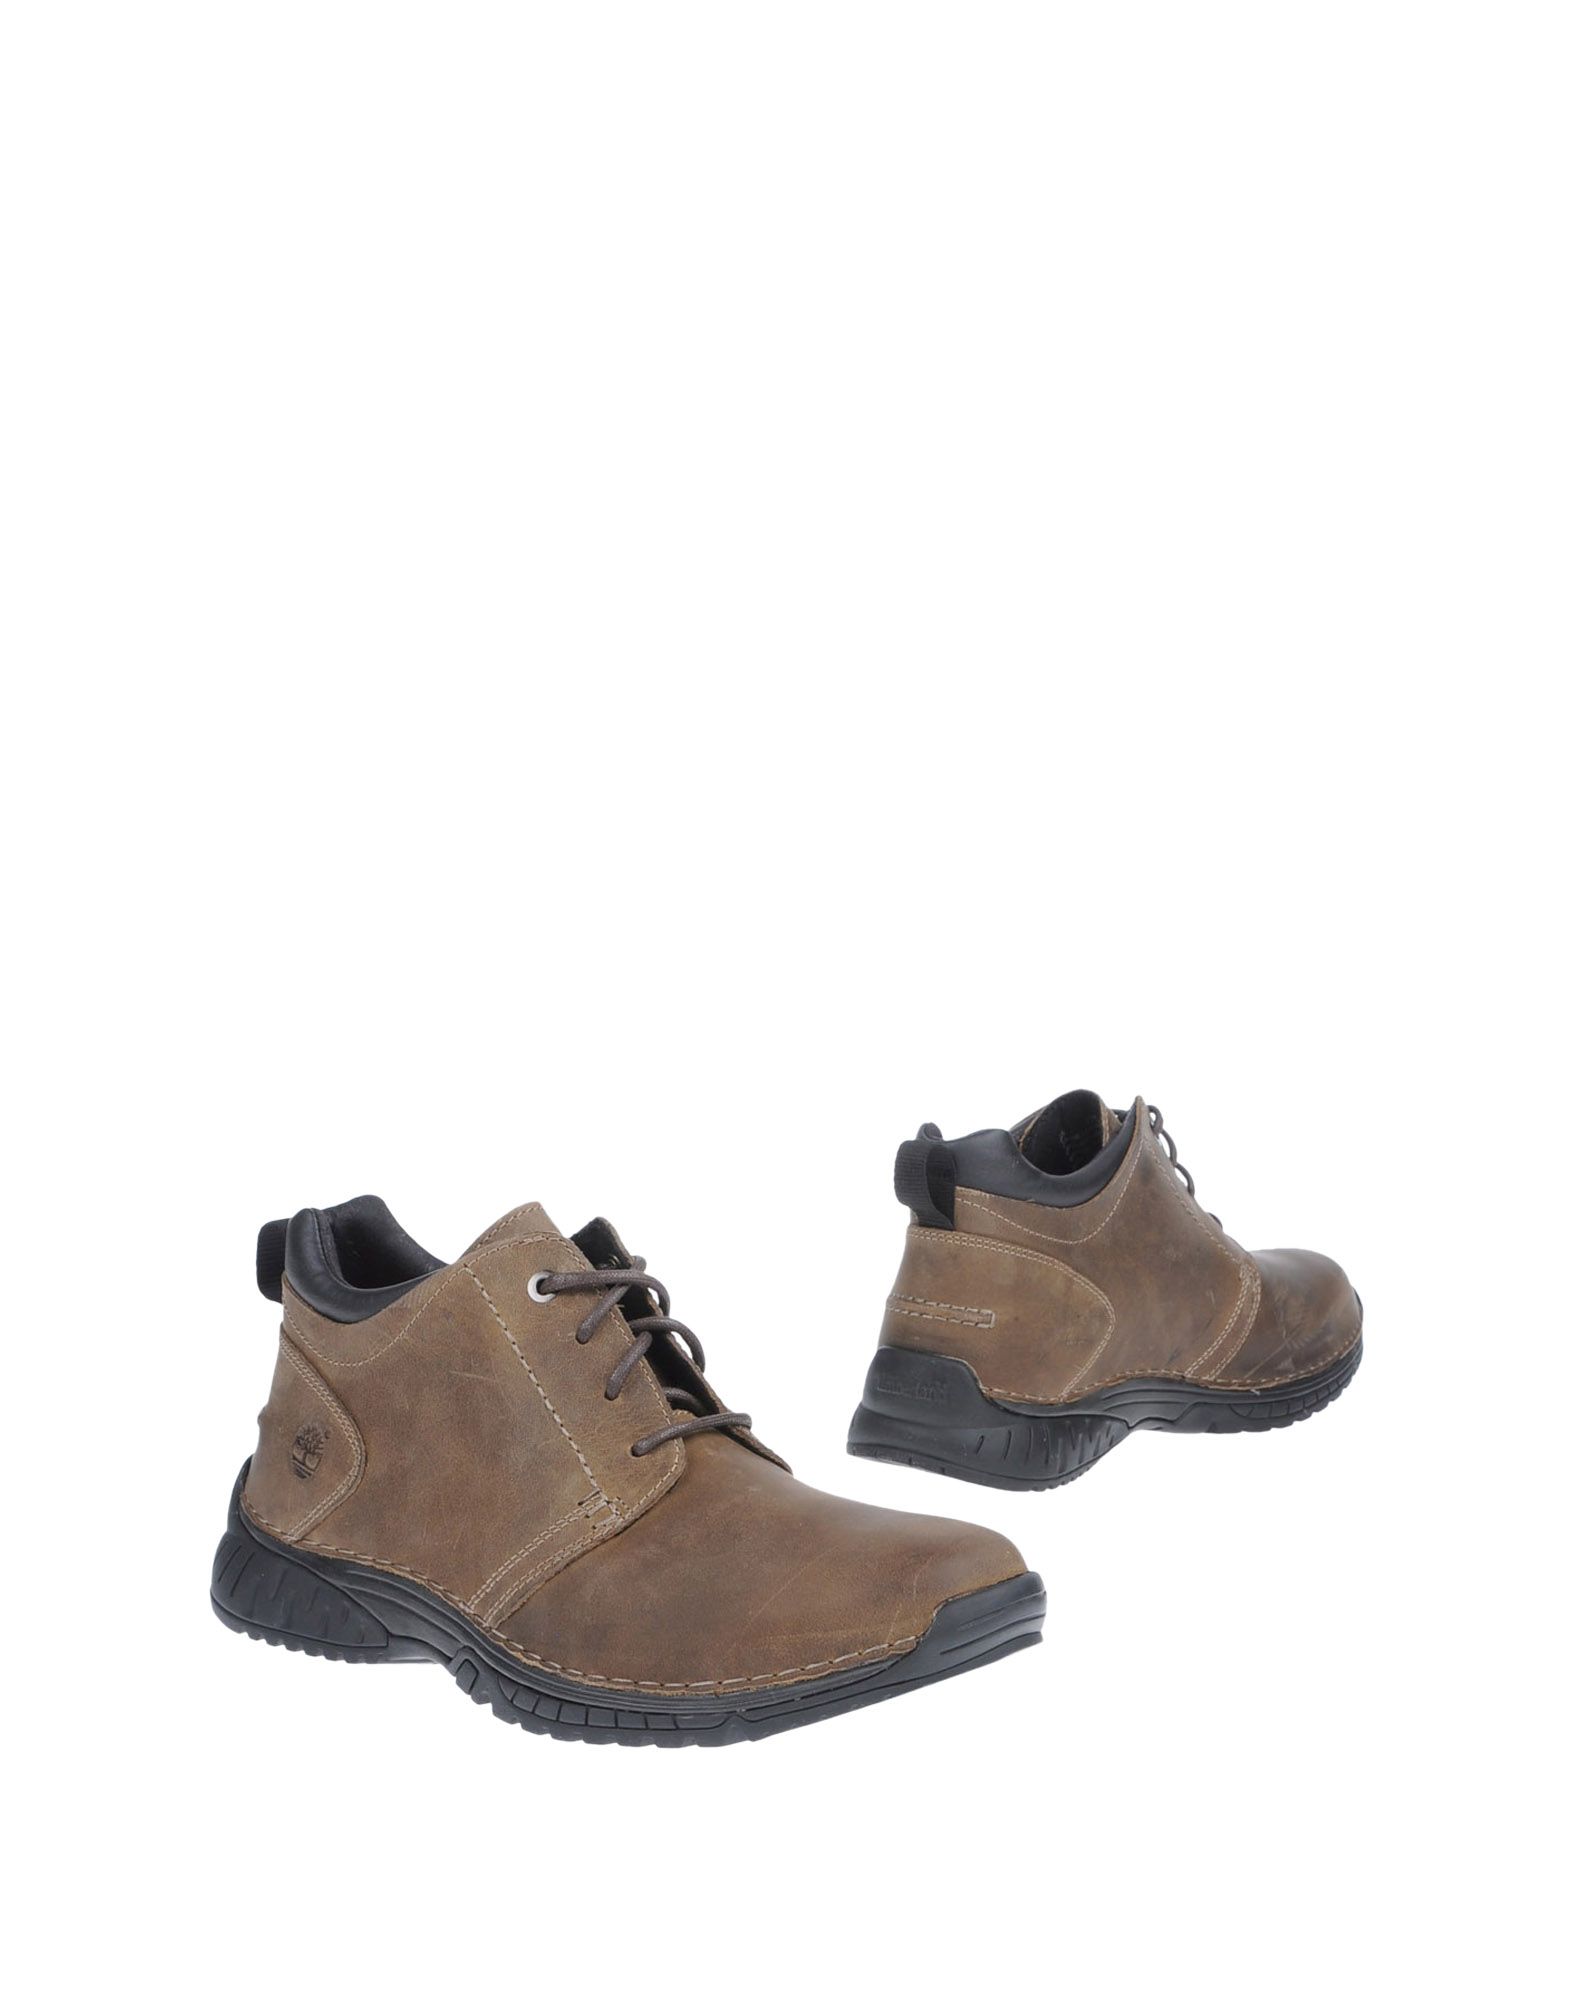 Foto Earthkeepers By Timberland Botines Cordones Hombre Caqui foto 686712